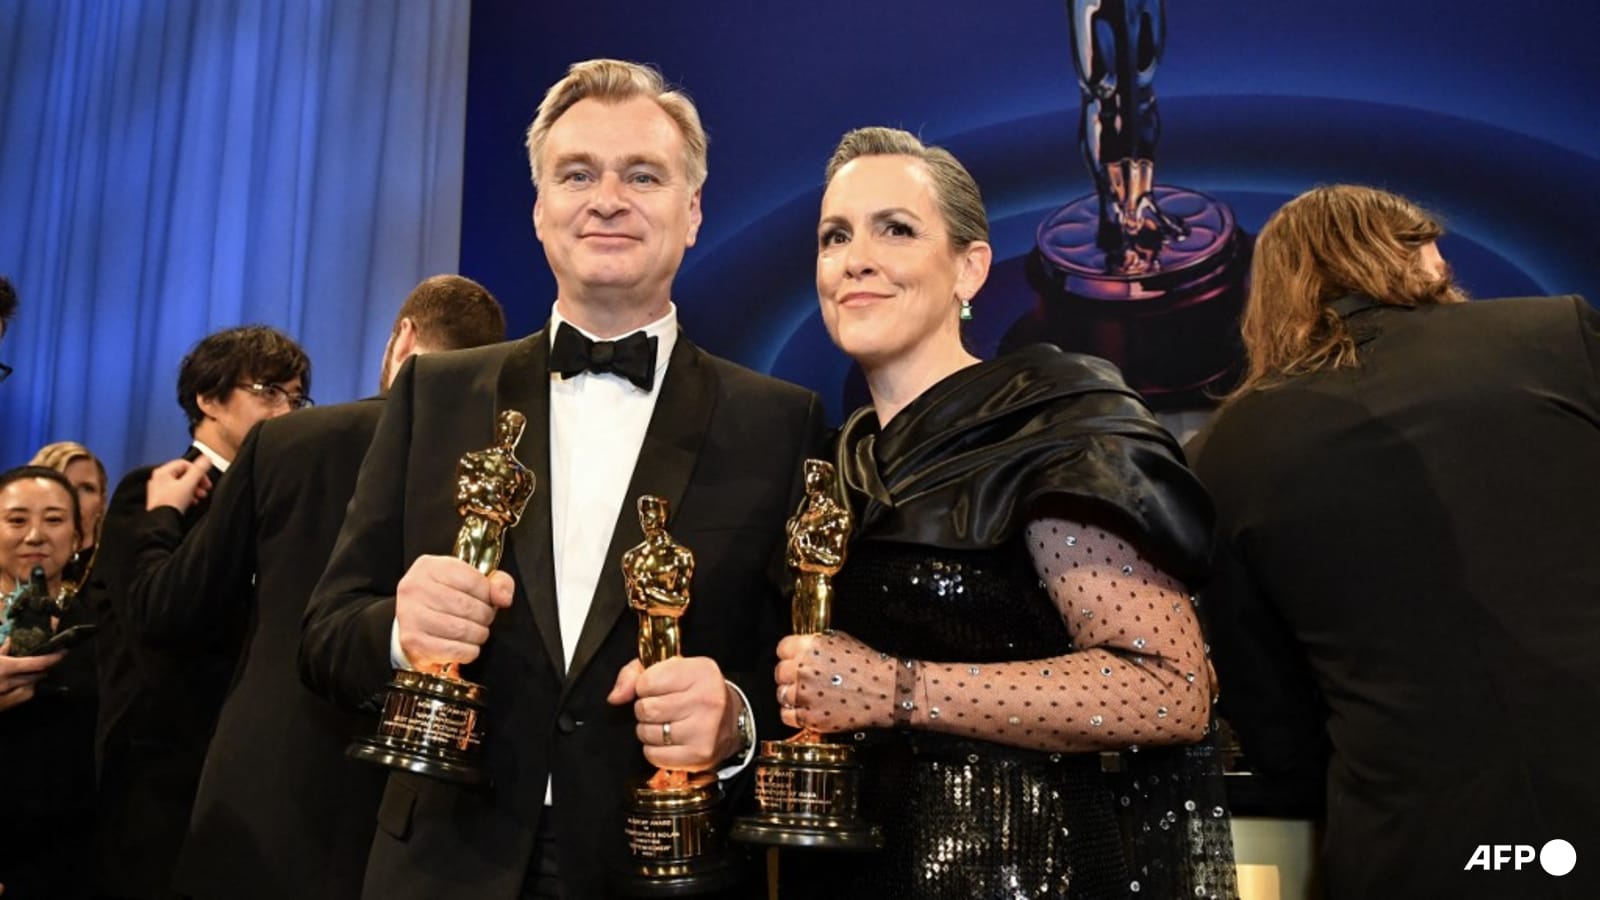 Oppenheimer director Christopher Nolan and wife Emma Thomas to get British knighthood and damehood